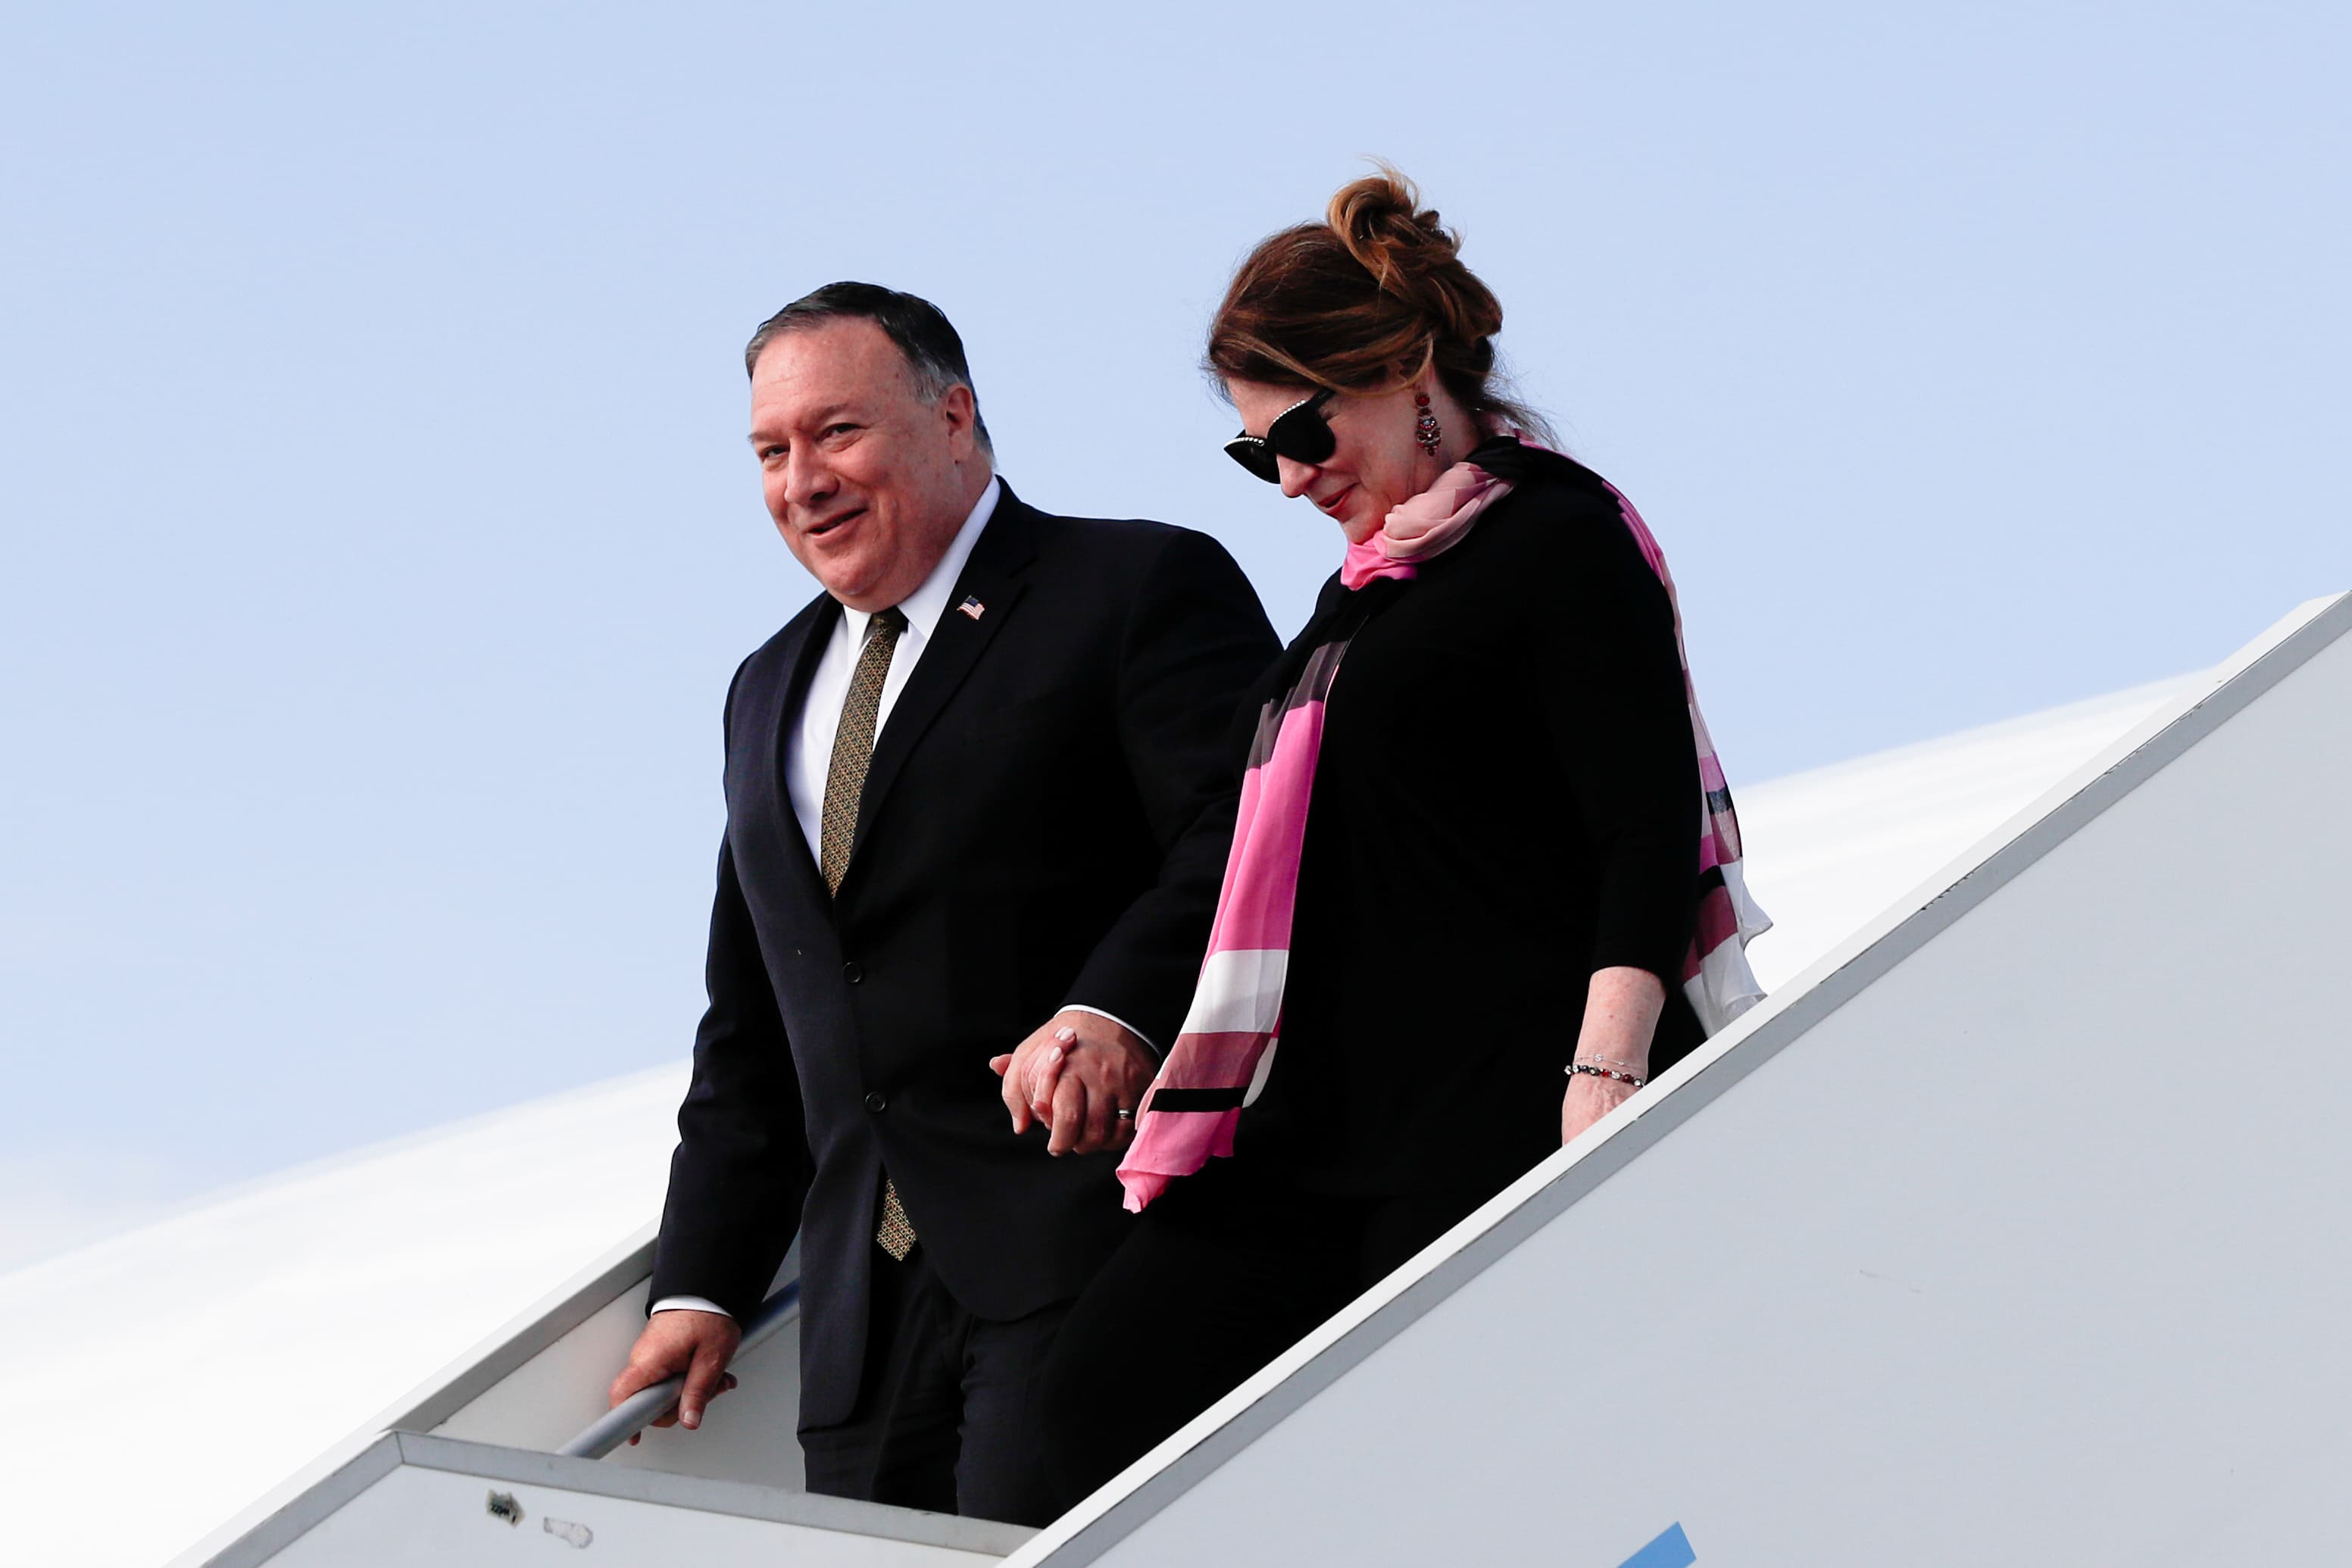 Mike Pompeo has spent tax money on pens made in China for elite diners